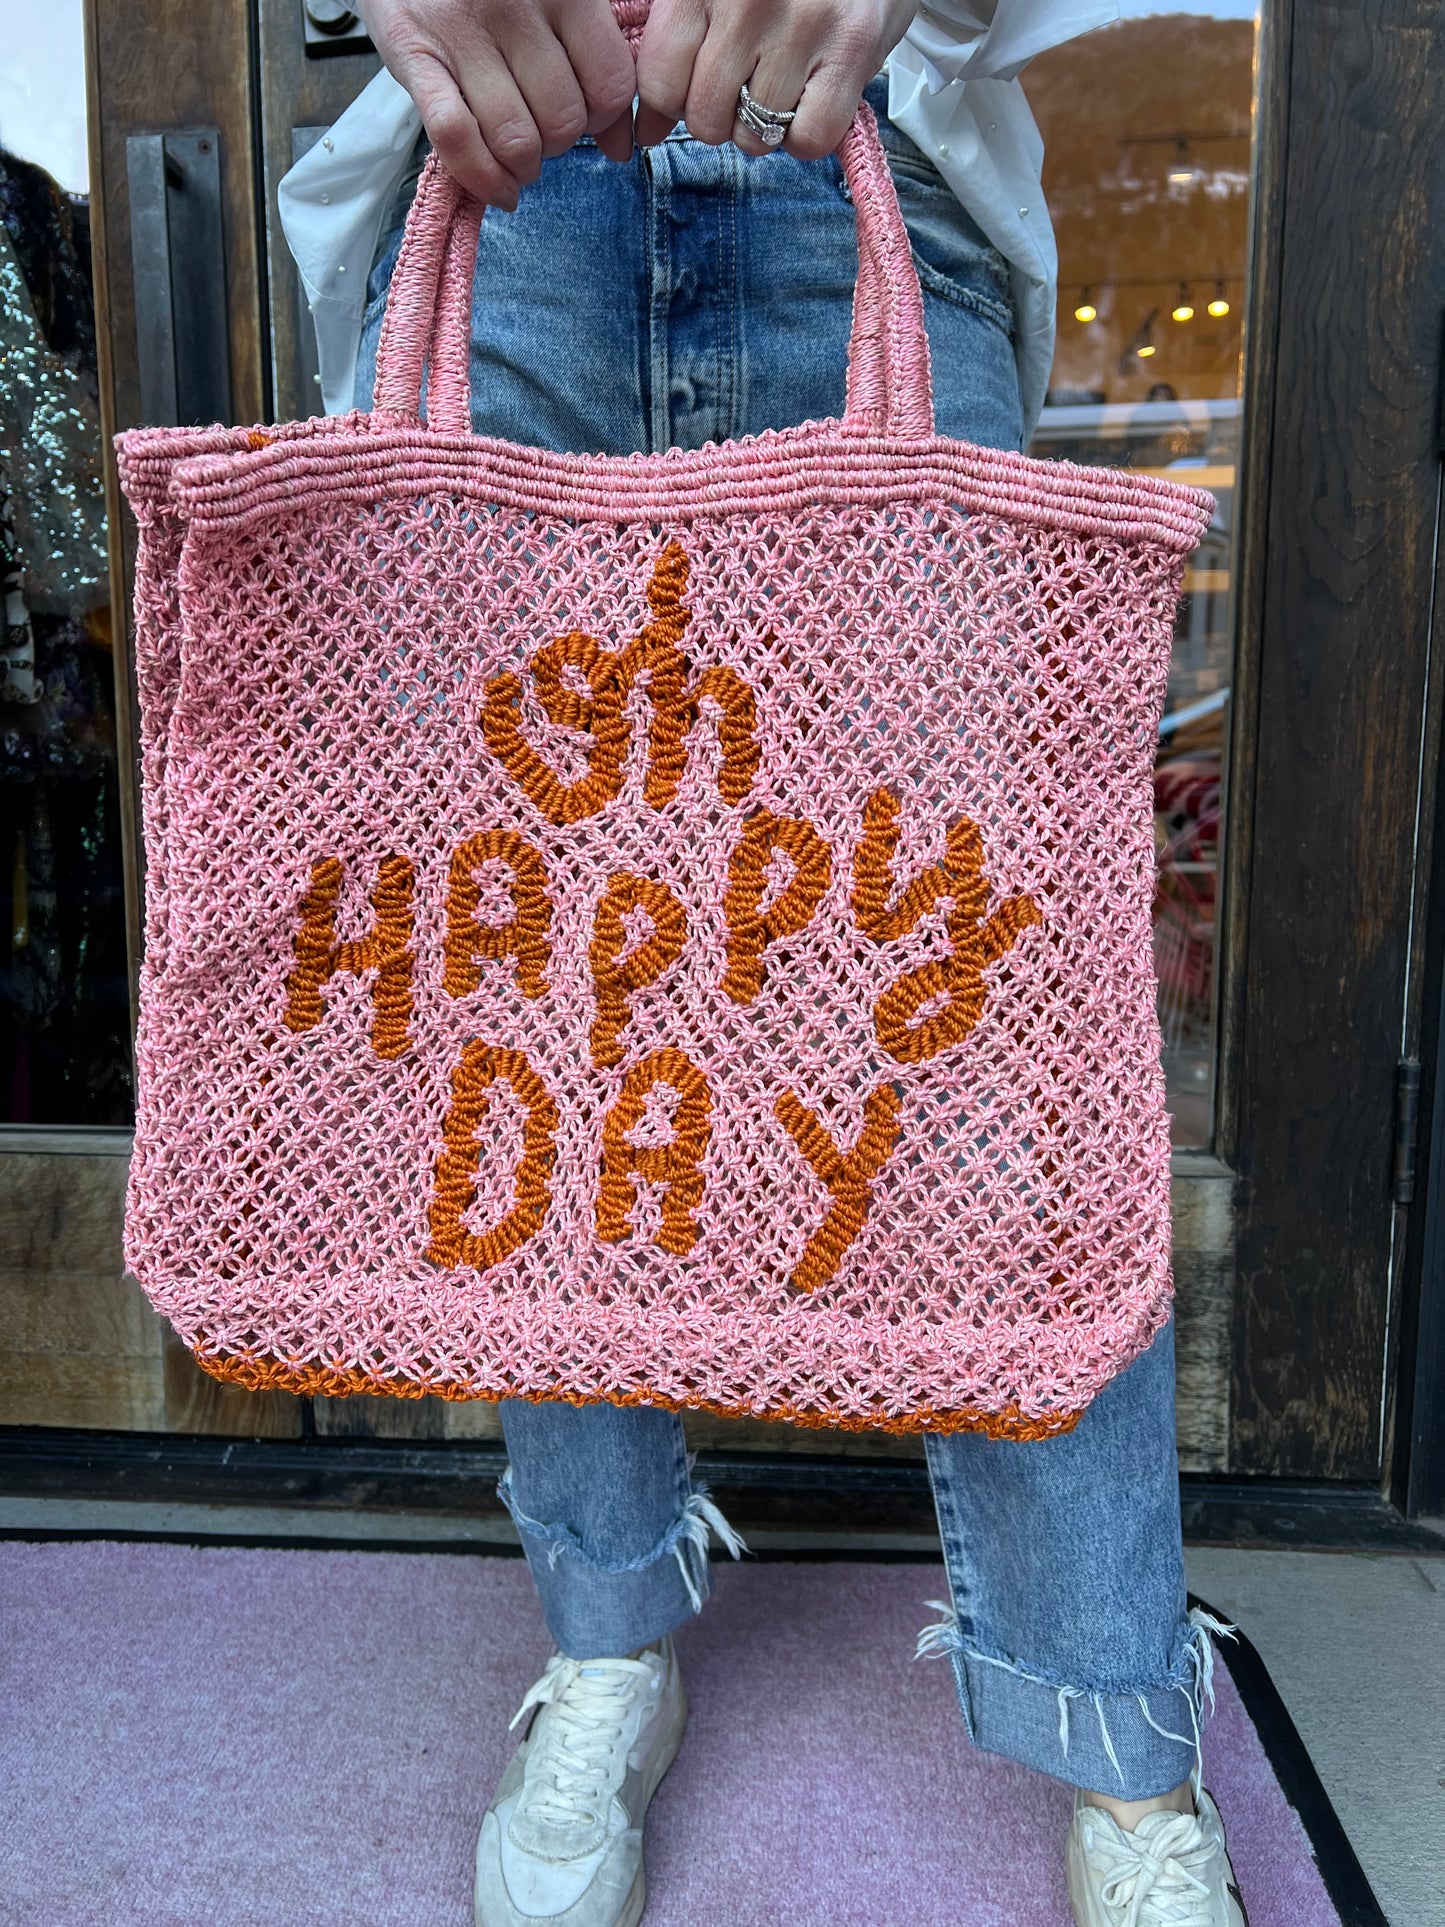 Jacksons "OH HAPPY DAY" Small Tote